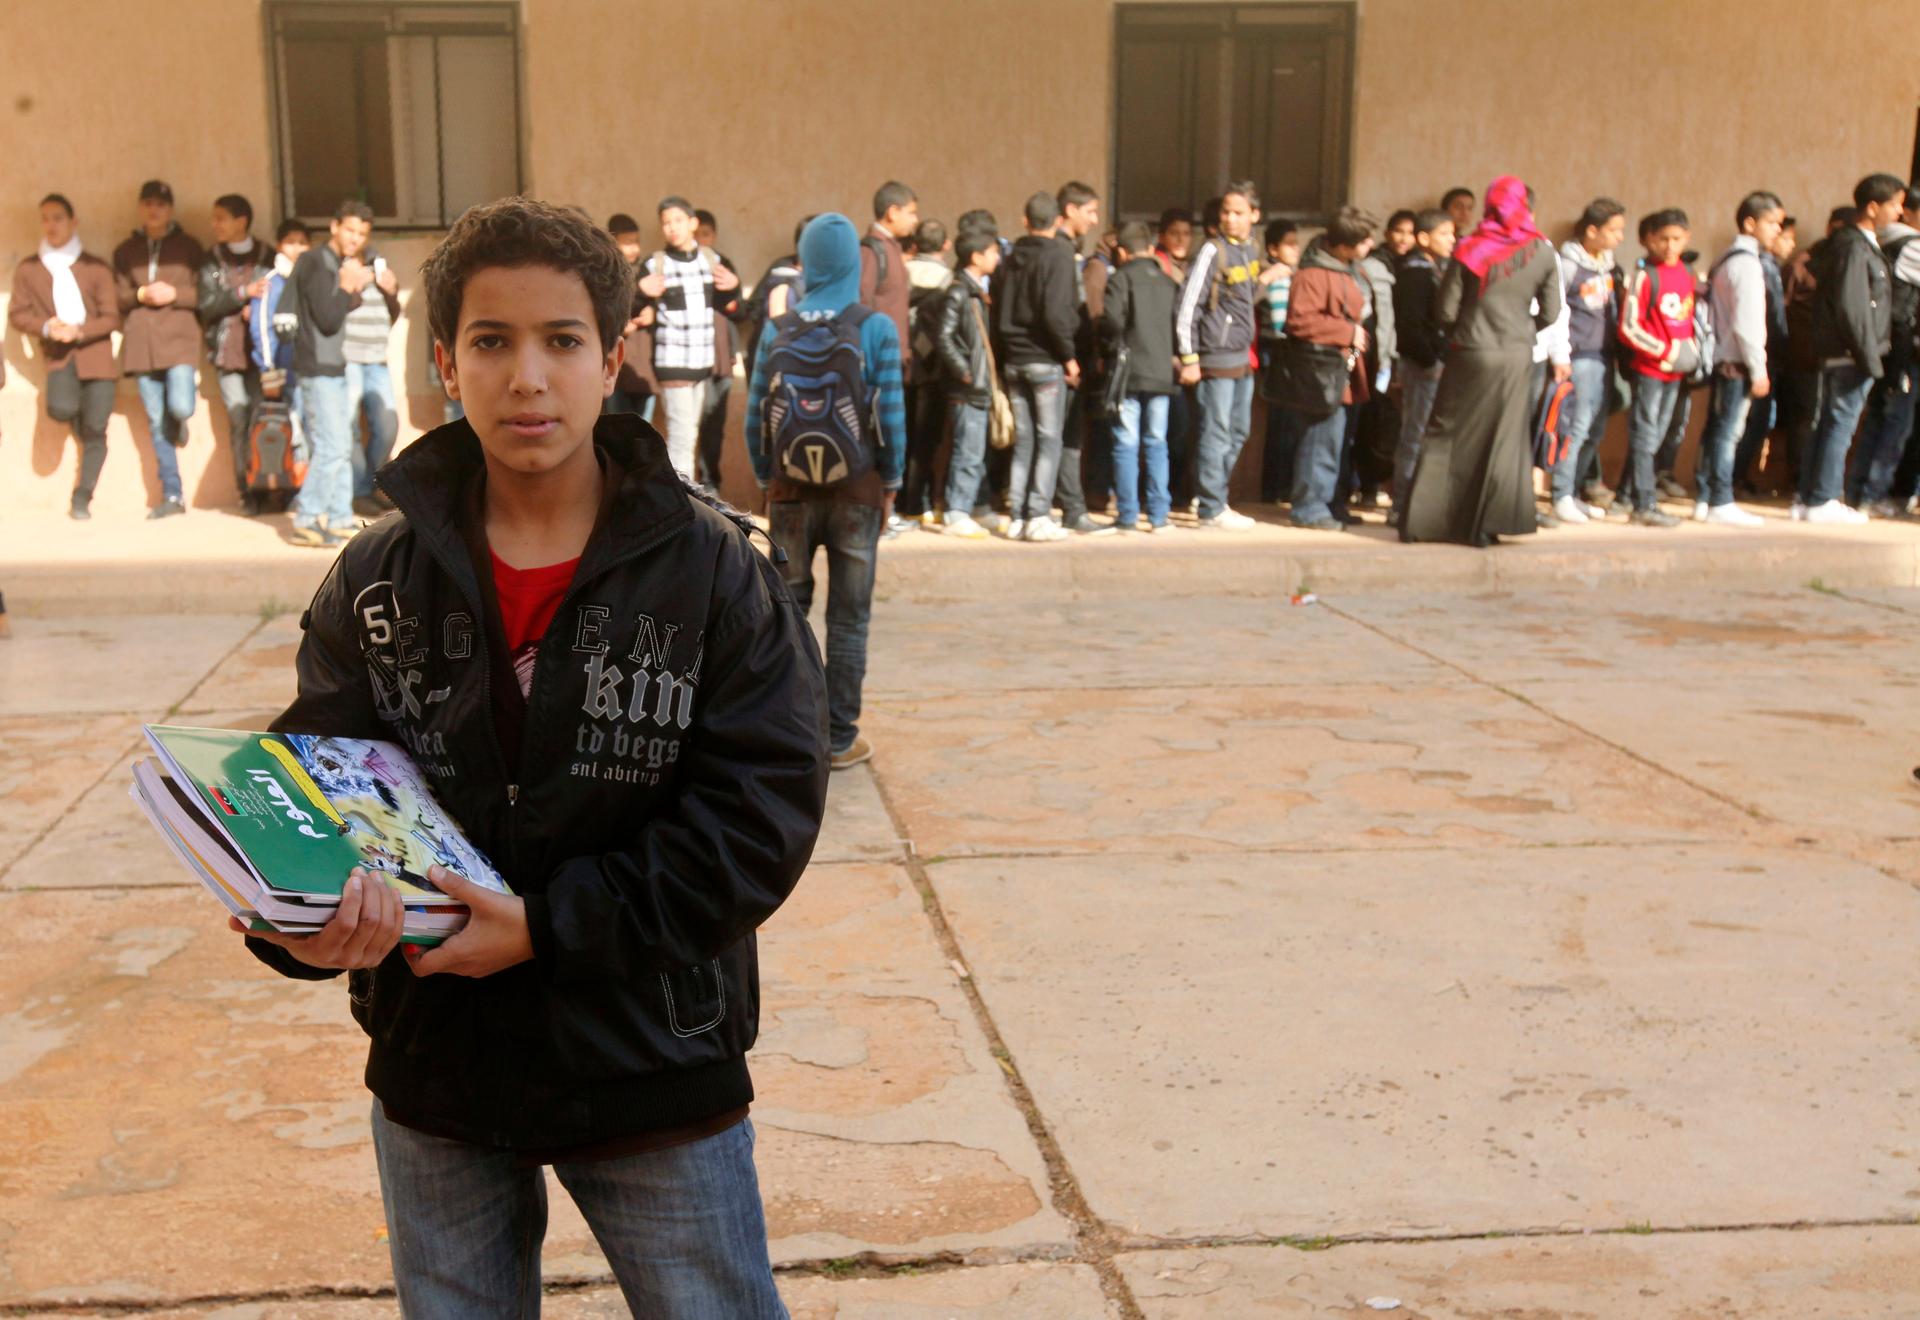 A Libyan student stands with newly received textbooks in Benghazi on January 18, 2012.